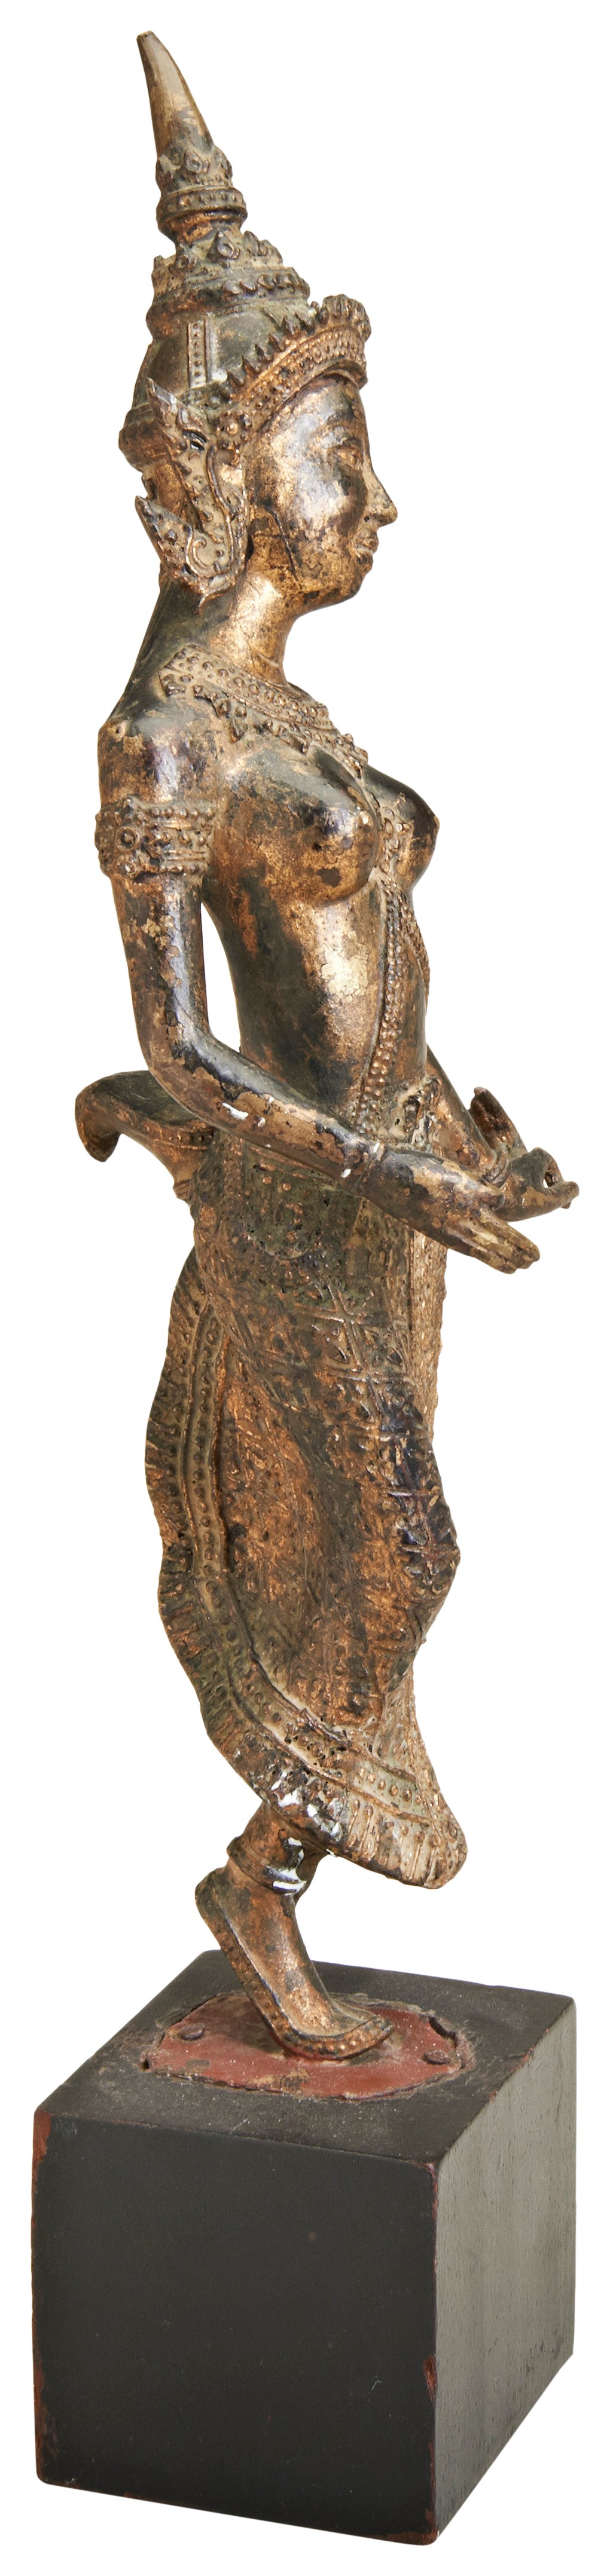 A GILT-BRONZE FIGURE OF A KHON DANCER THAILAND, LATE 19TH / EARLY 20TH CENTURY on a later wood stand - Image 2 of 3